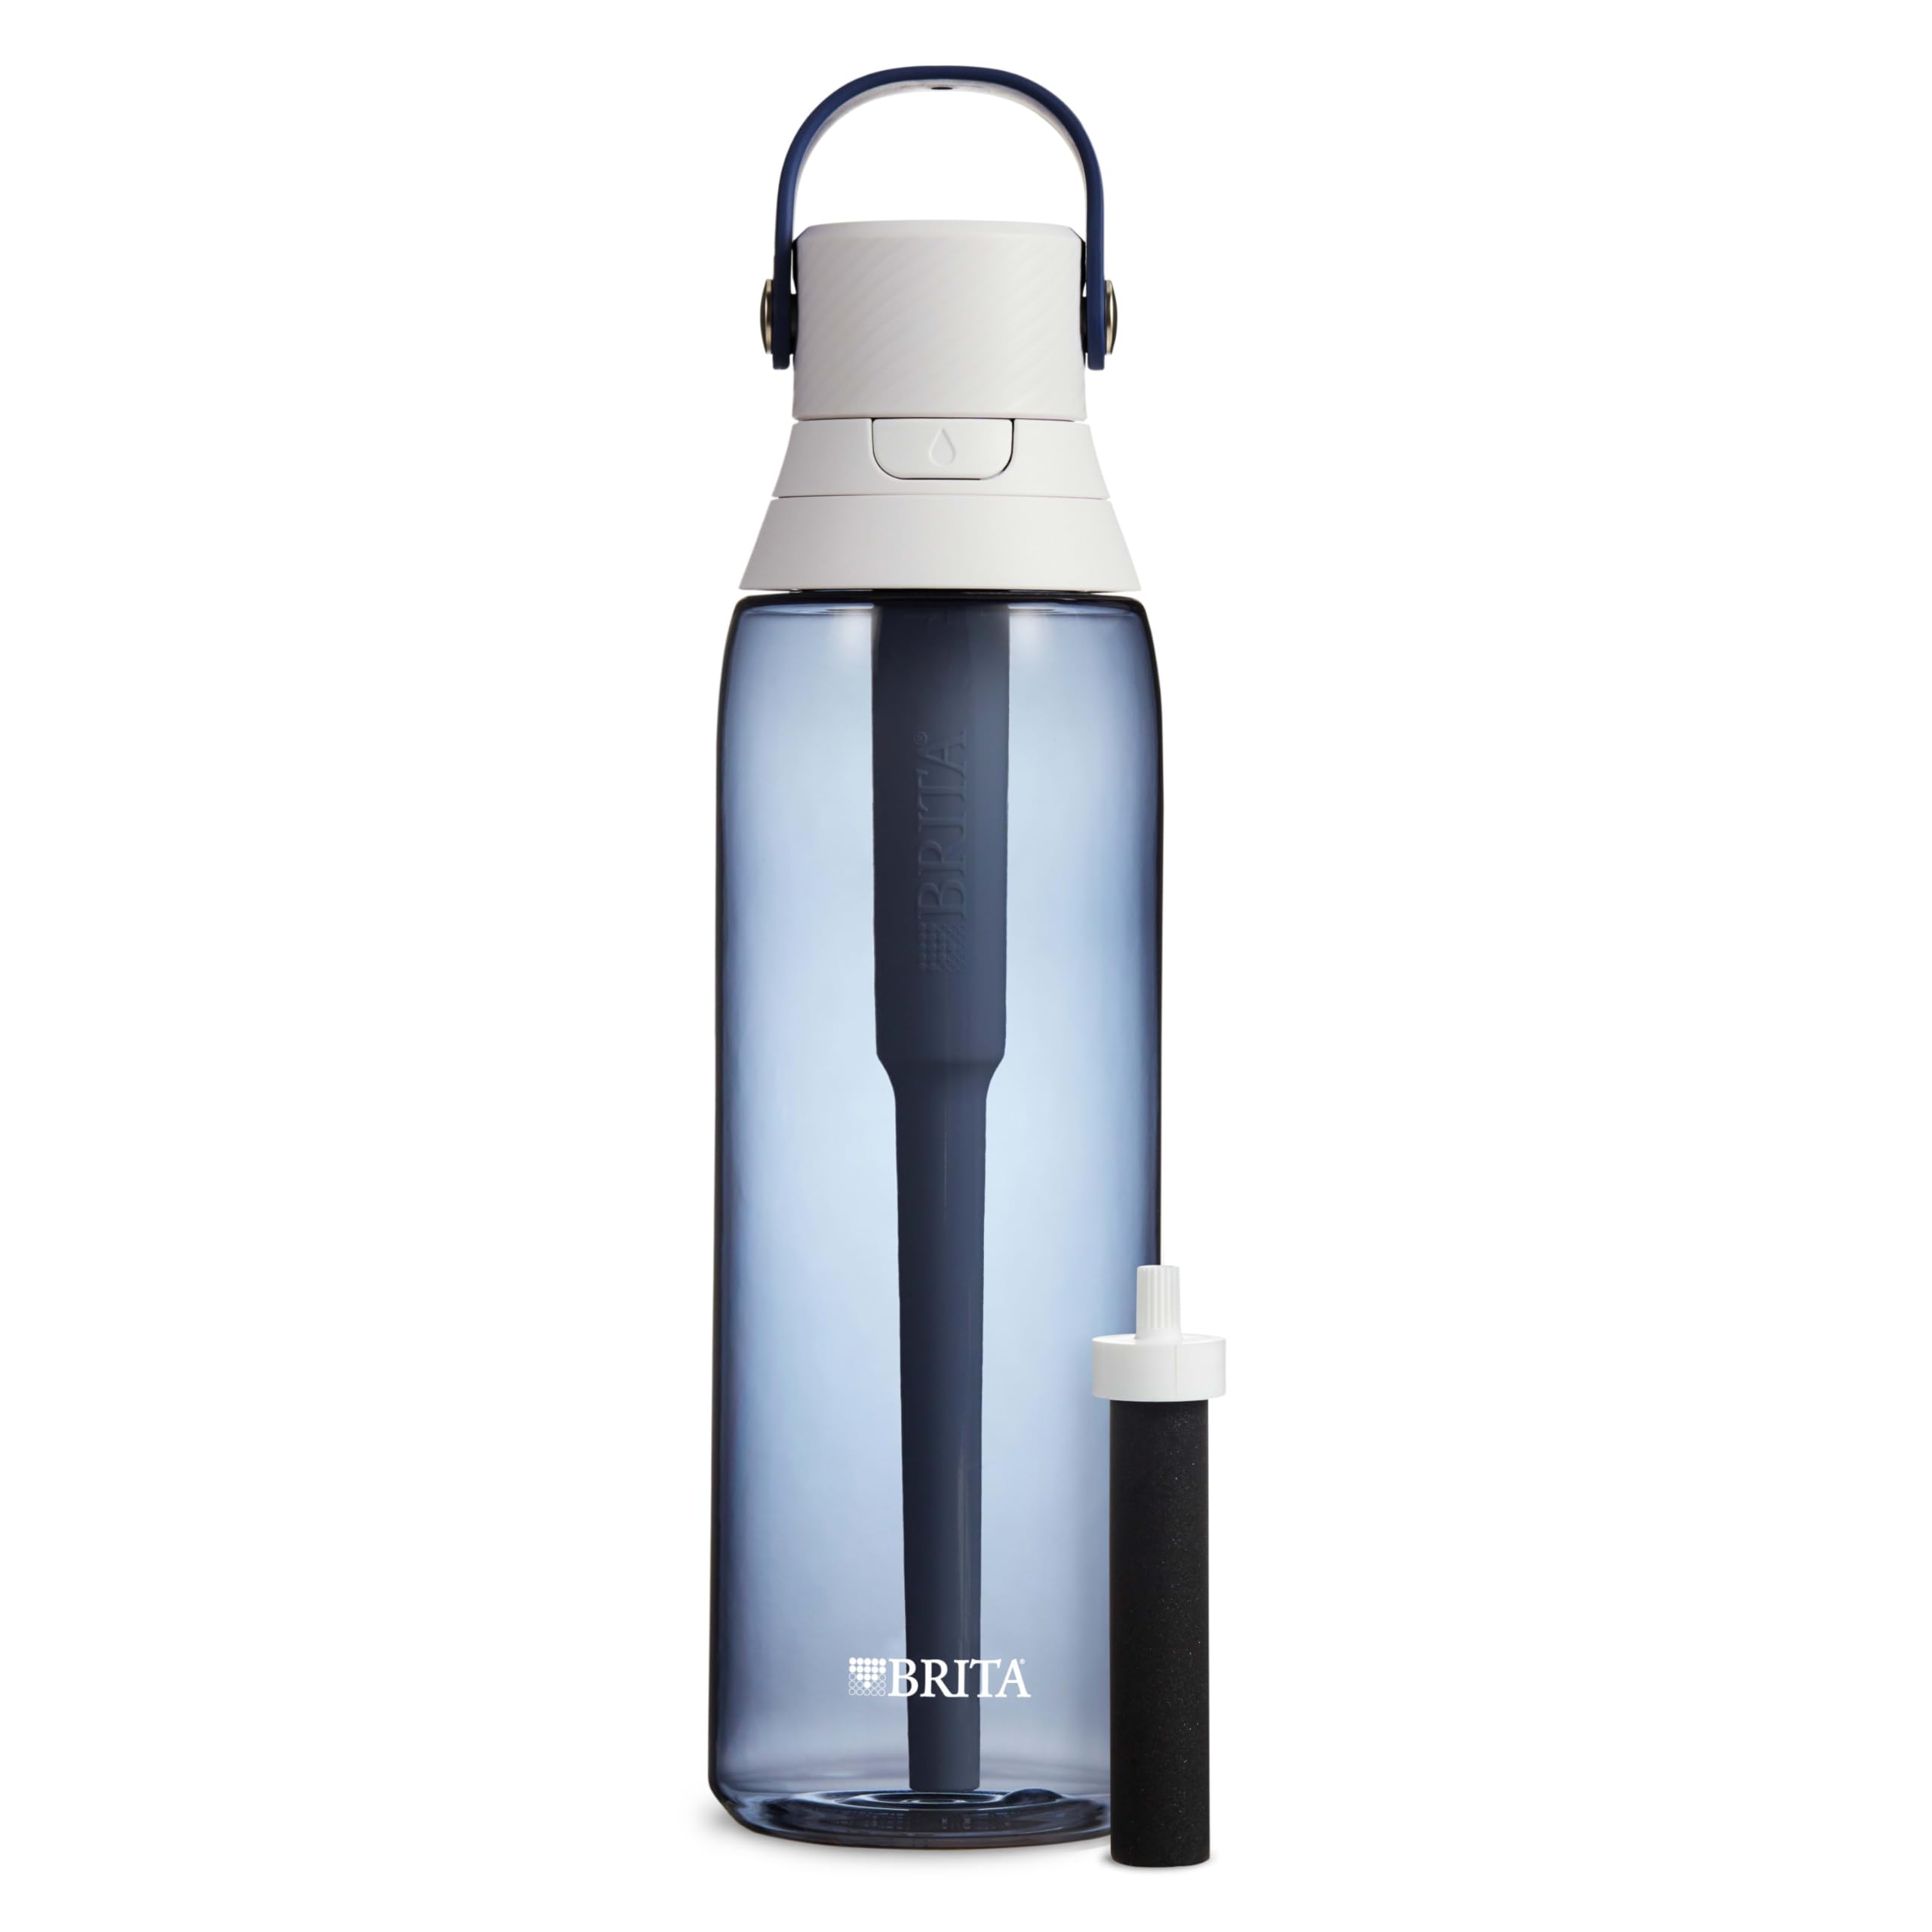 Brita Insulated Filtered Water Bottle with Straw, Reusable, Christmas Gift and Stocking Stuffer For Men and Women, BPA Free Plastic, Night Sky, 26 Ounce $12.89